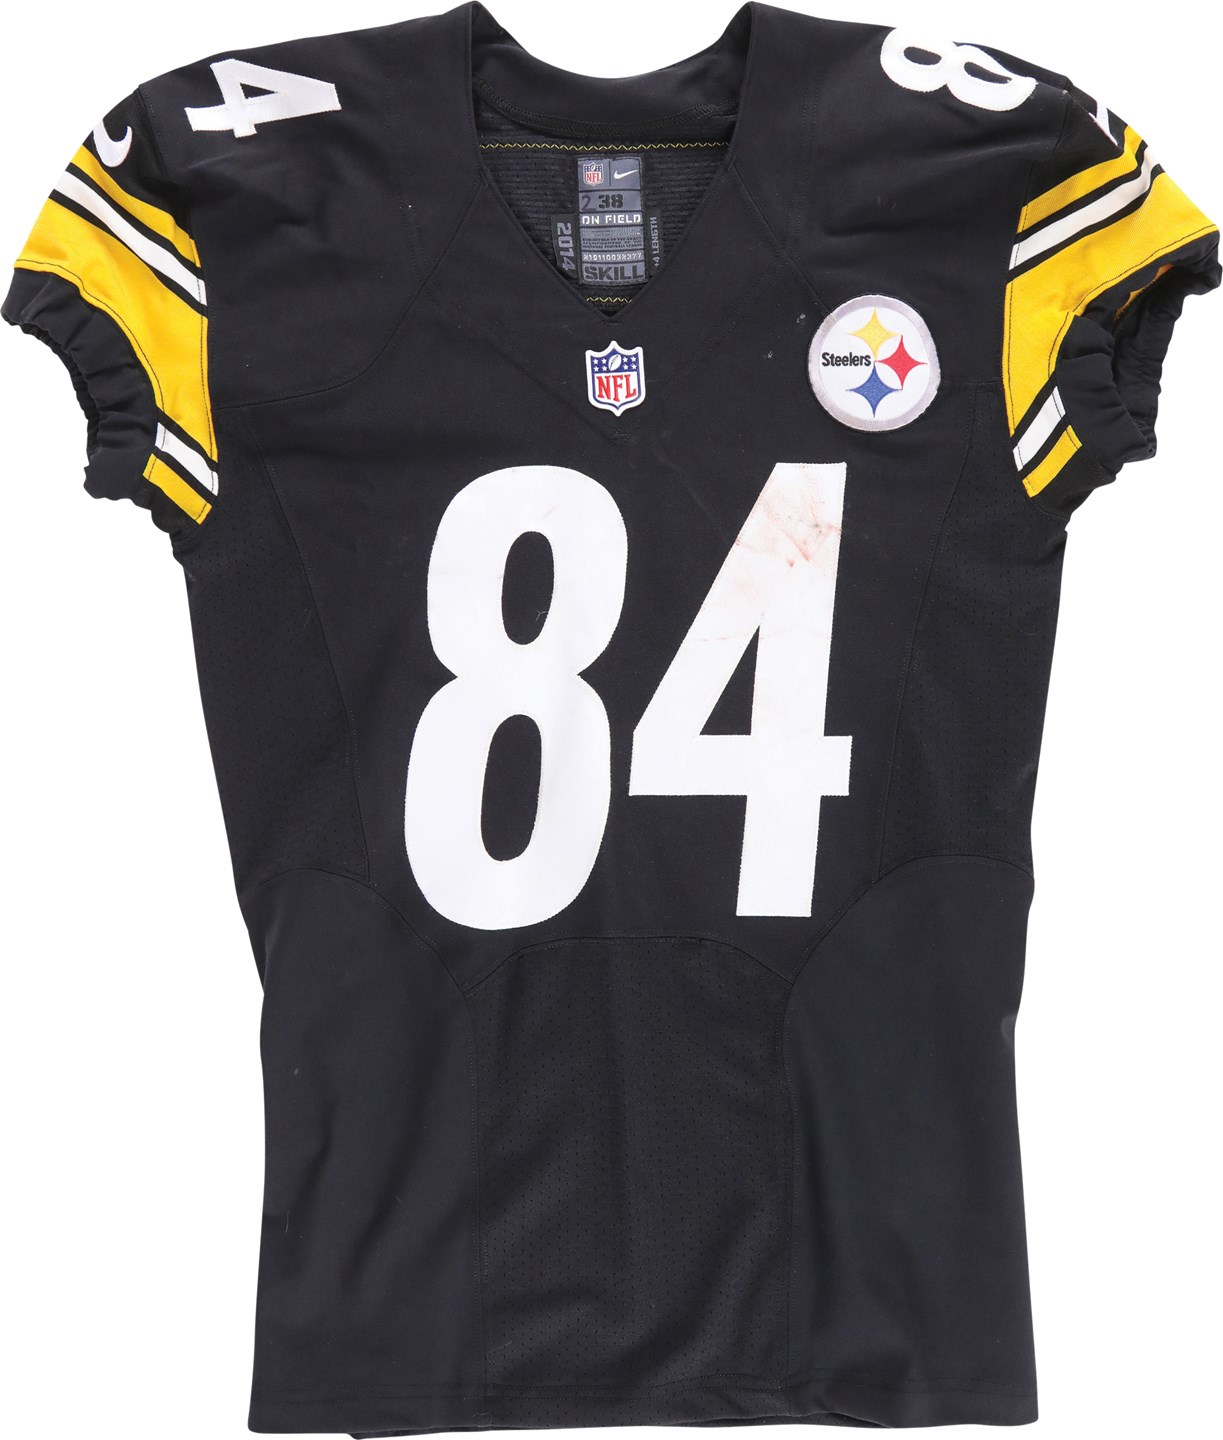 - 2014 Antonio Brown Pittsburgh Steelers Game Worn Jersey - Season High 144 Yards and 1 TD (Photo-Matched)